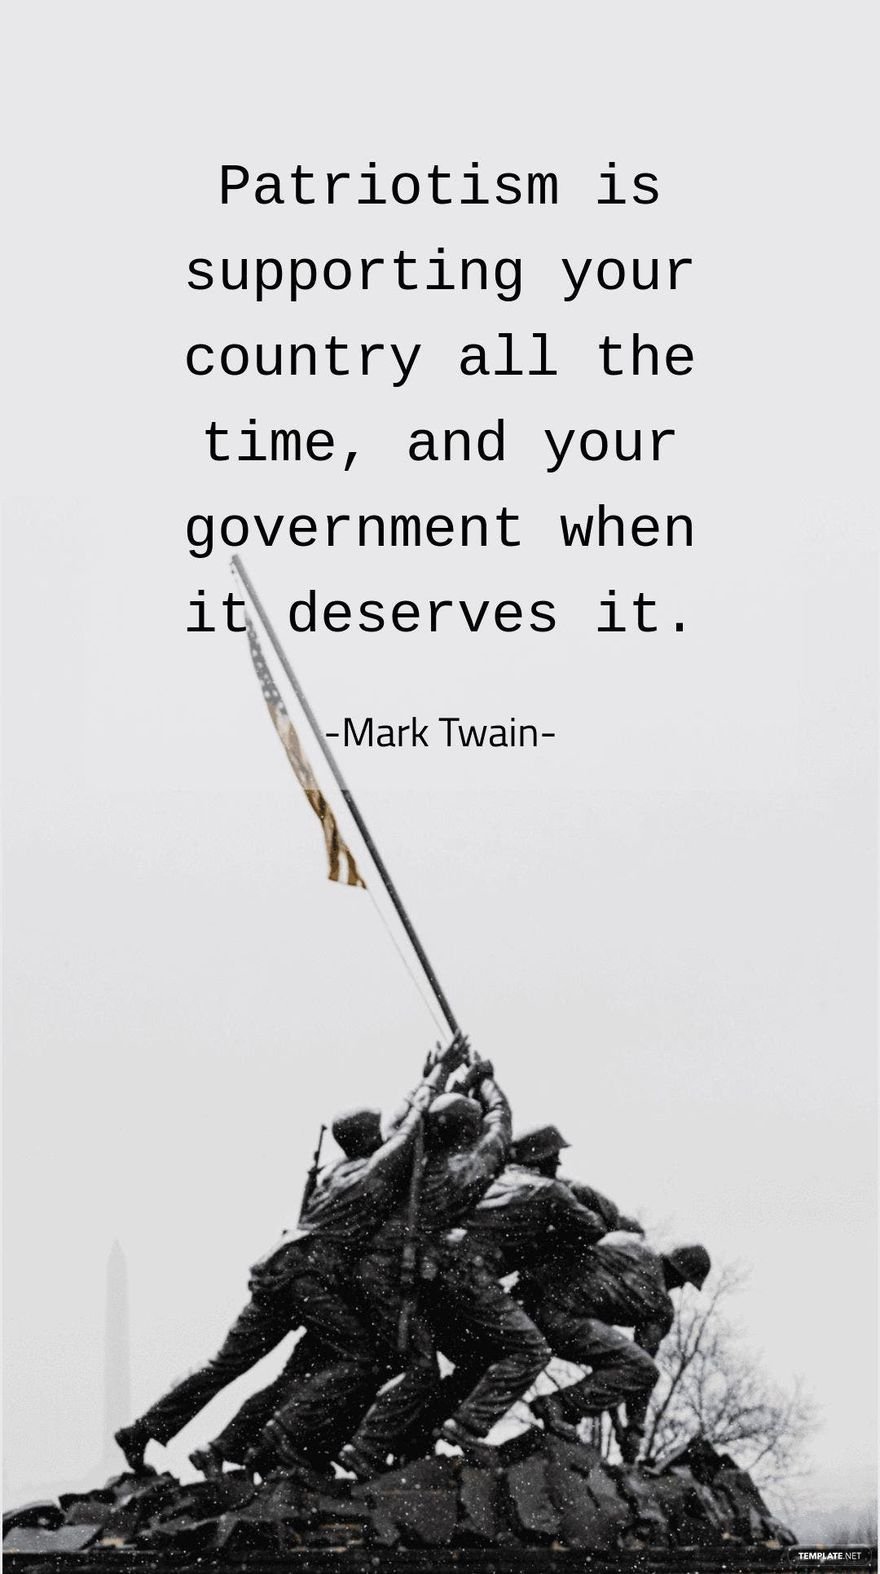 Free Mark Twain - Patriotism is supporting your country all the time, and your government when it deserves it.